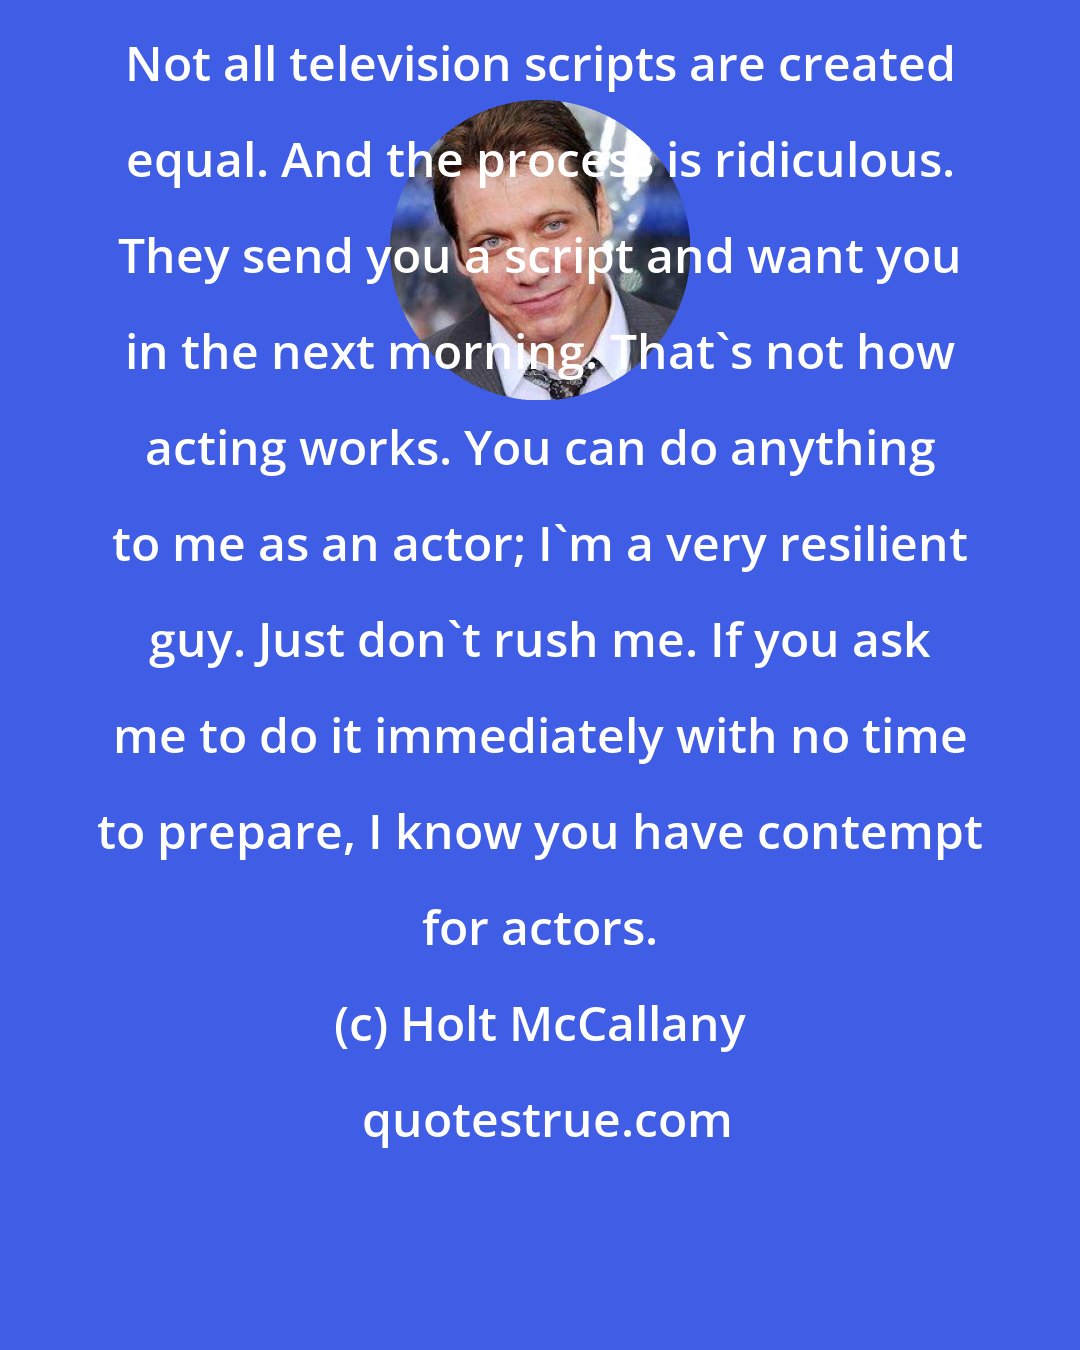 Holt McCallany: Not all television scripts are created equal. And the process is ridiculous. They send you a script and want you in the next morning. That's not how acting works. You can do anything to me as an actor; I'm a very resilient guy. Just don't rush me. If you ask me to do it immediately with no time to prepare, I know you have contempt for actors.